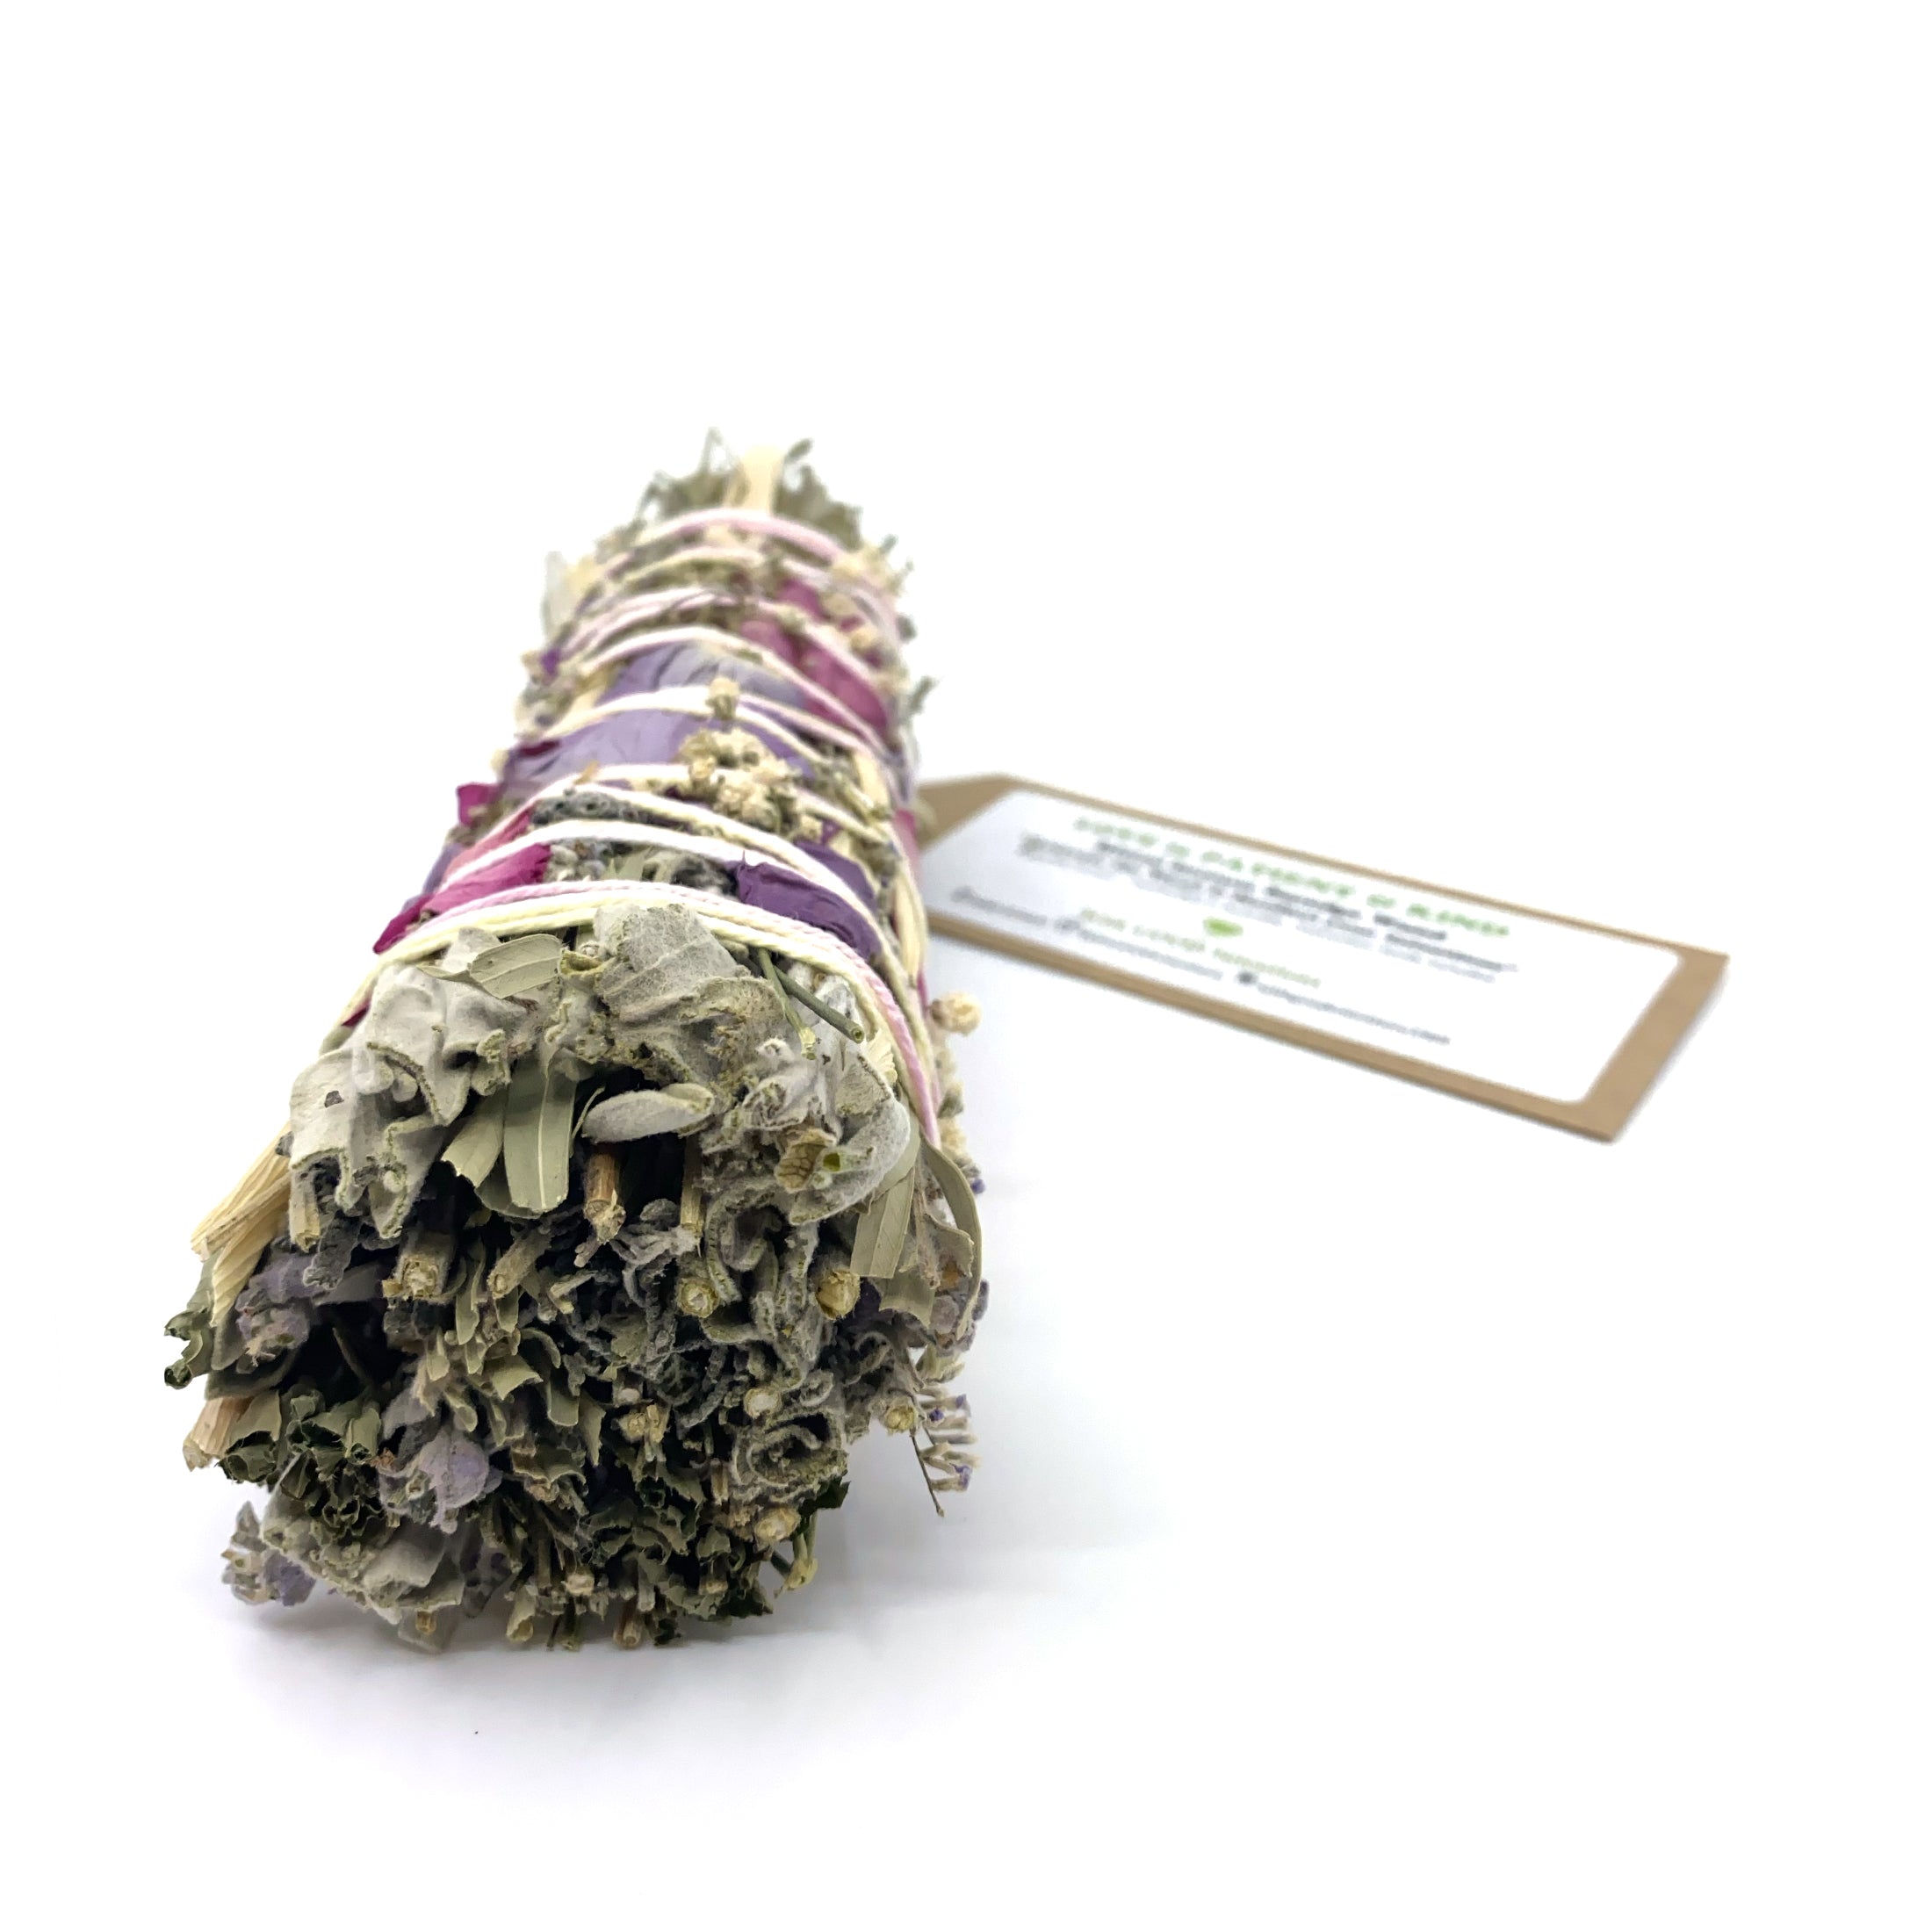 Love is Patient & Kind - With Good Intentions Smudge Stick